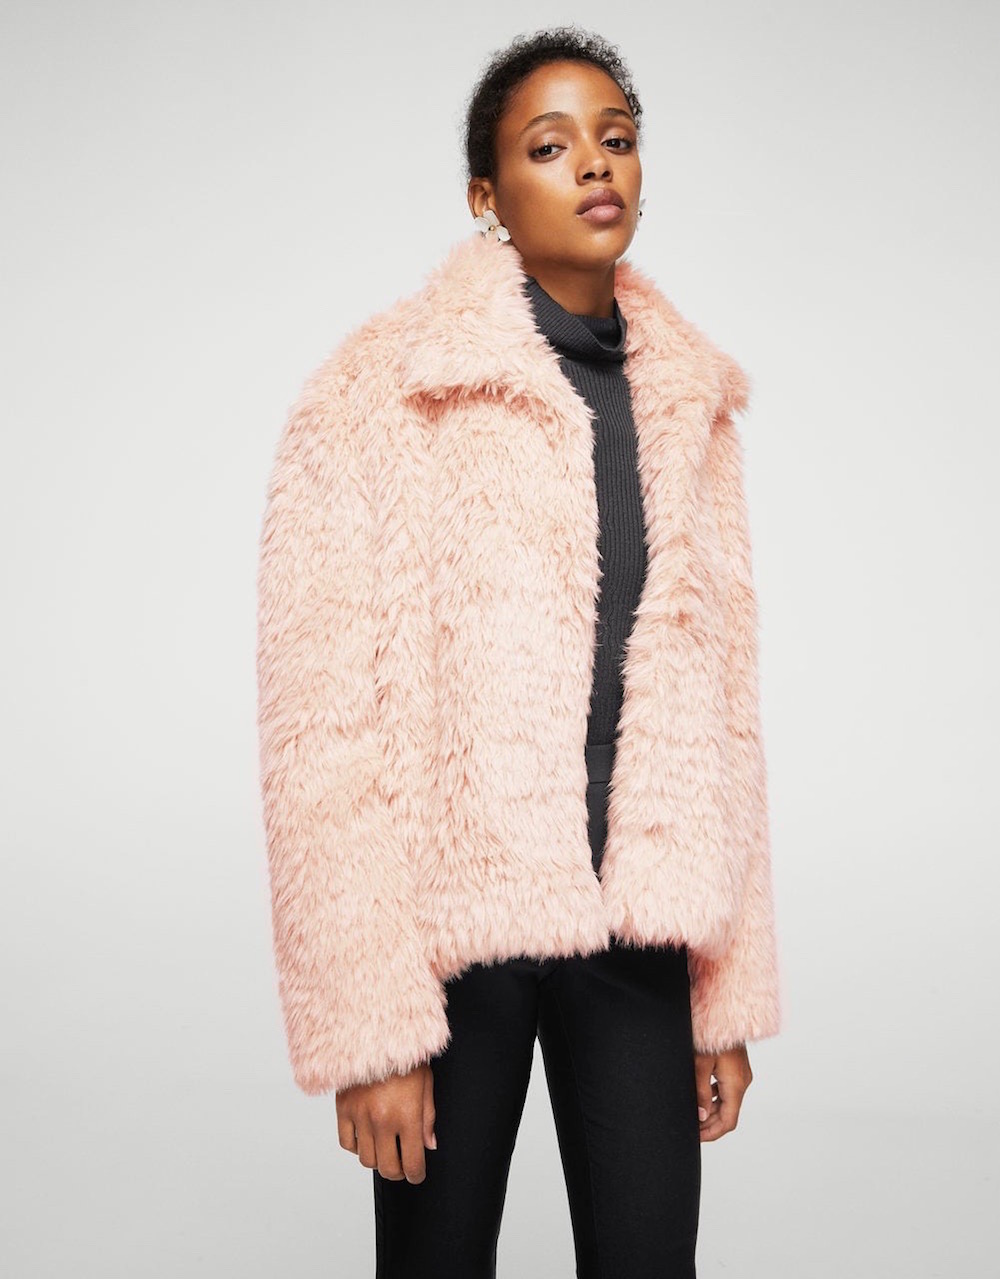 Faux Fur Teddy Jackets Are Fall's Most Snuggly Trend - theFashionSpot